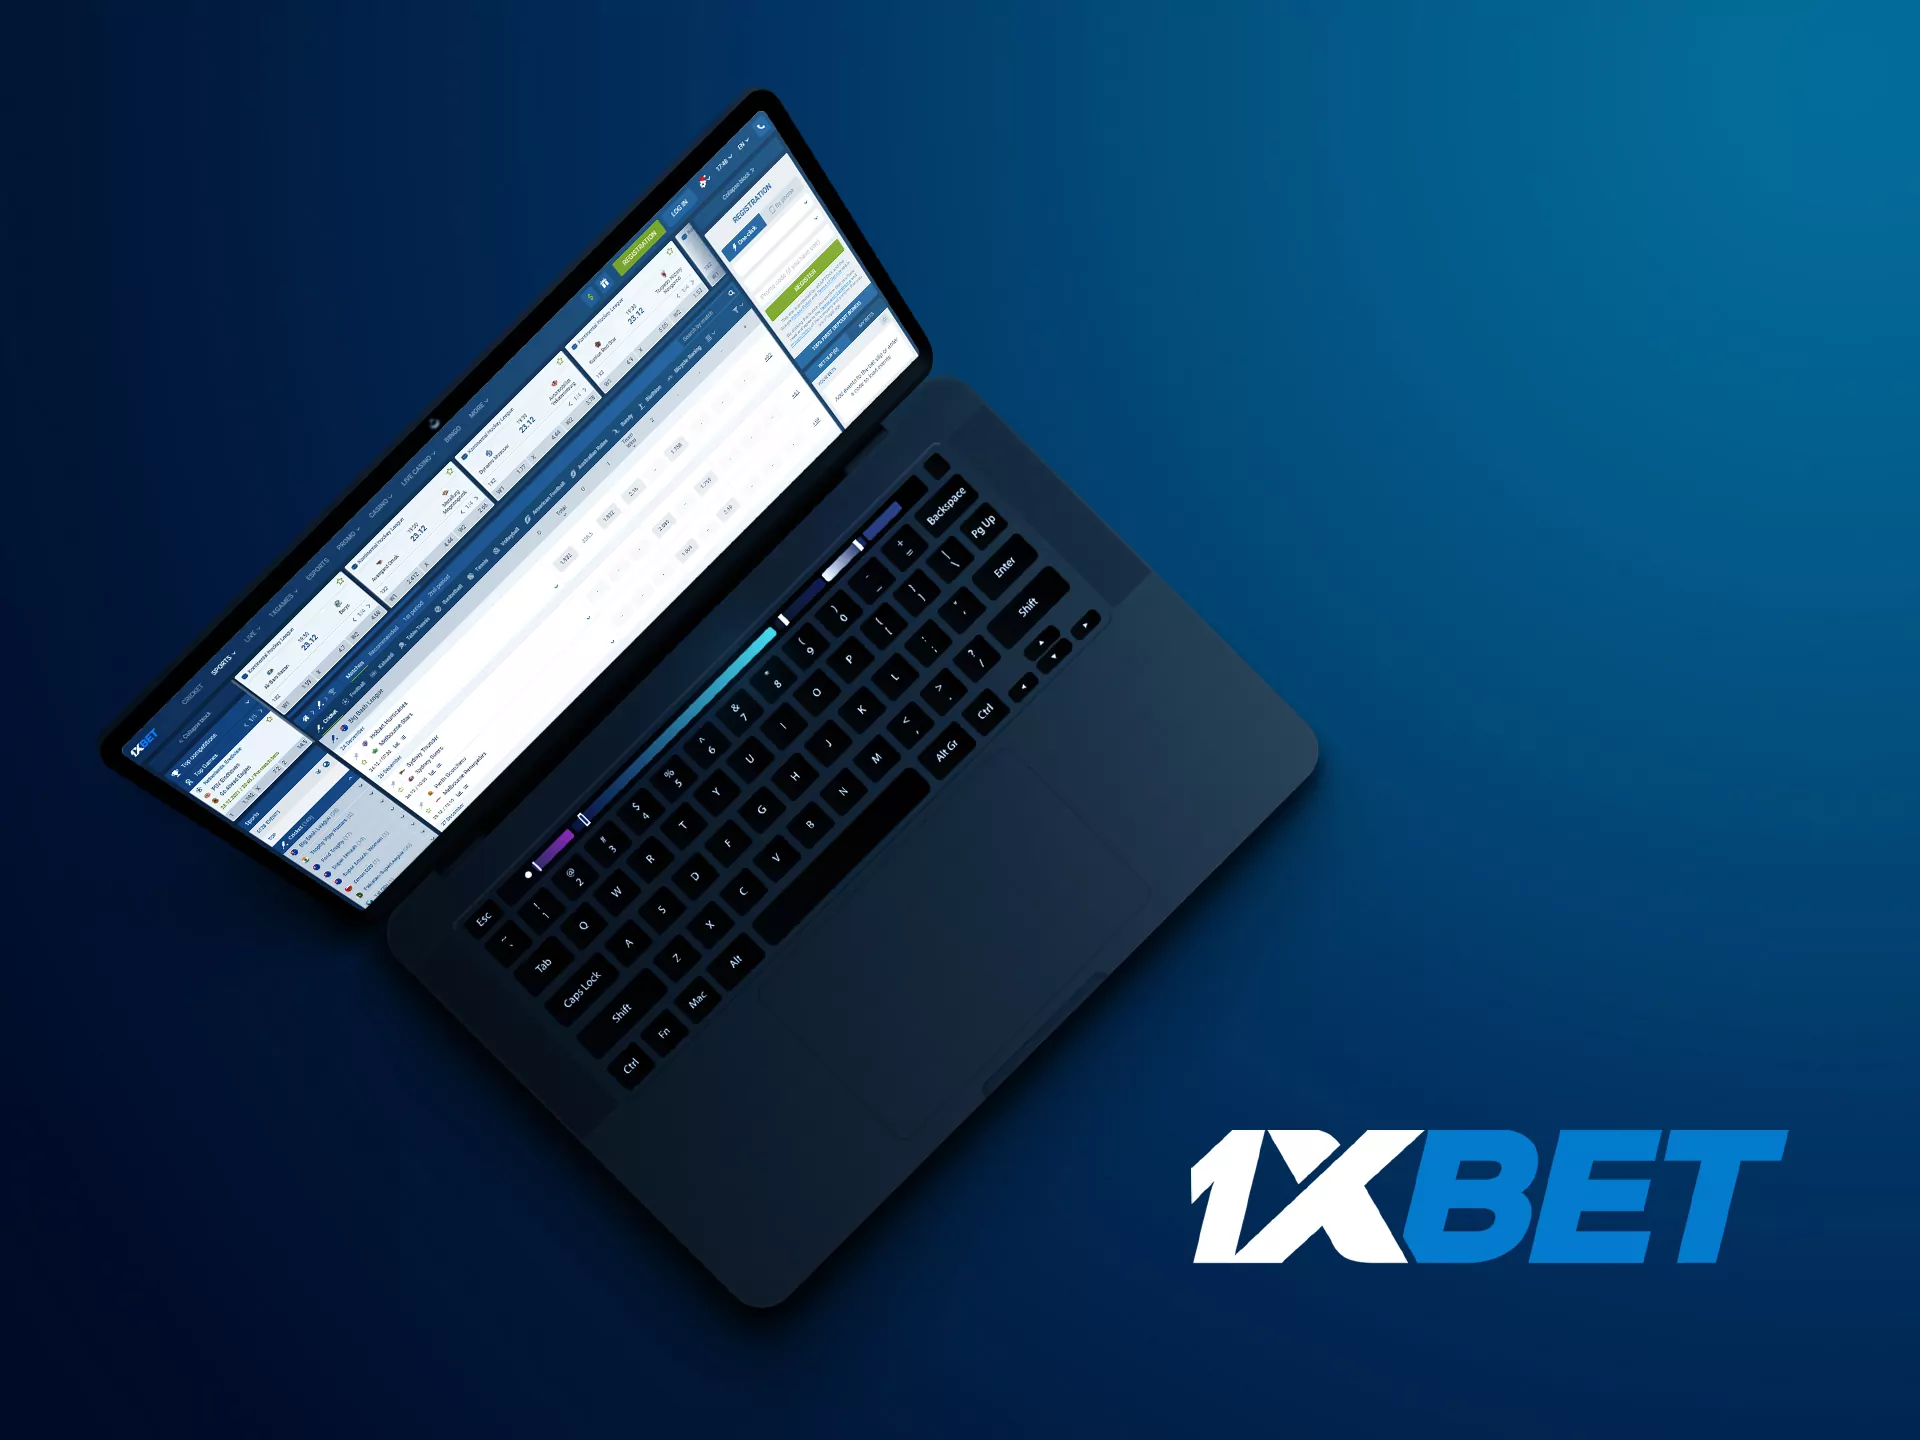 1xBet works under the Curacao license in 50 countries all over the world, and it is great choice for cricket betting.